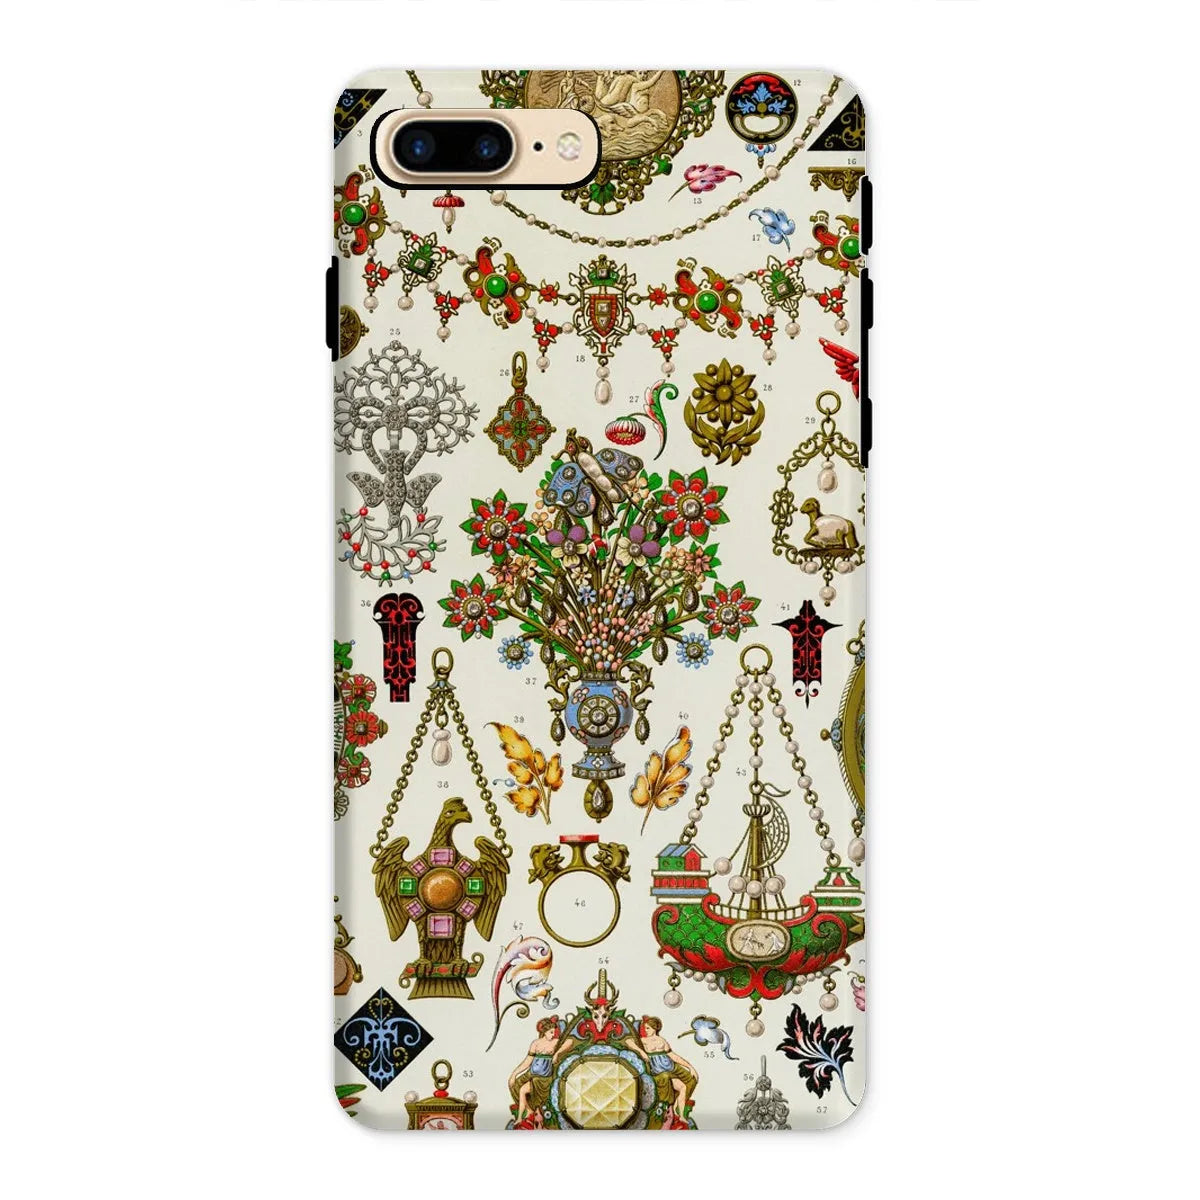 French Jewelry By Auguste Racinet Tough Phone Case - Iphone 8 Plus / Matte - Mobile Phone Cases - Aesthetic Art